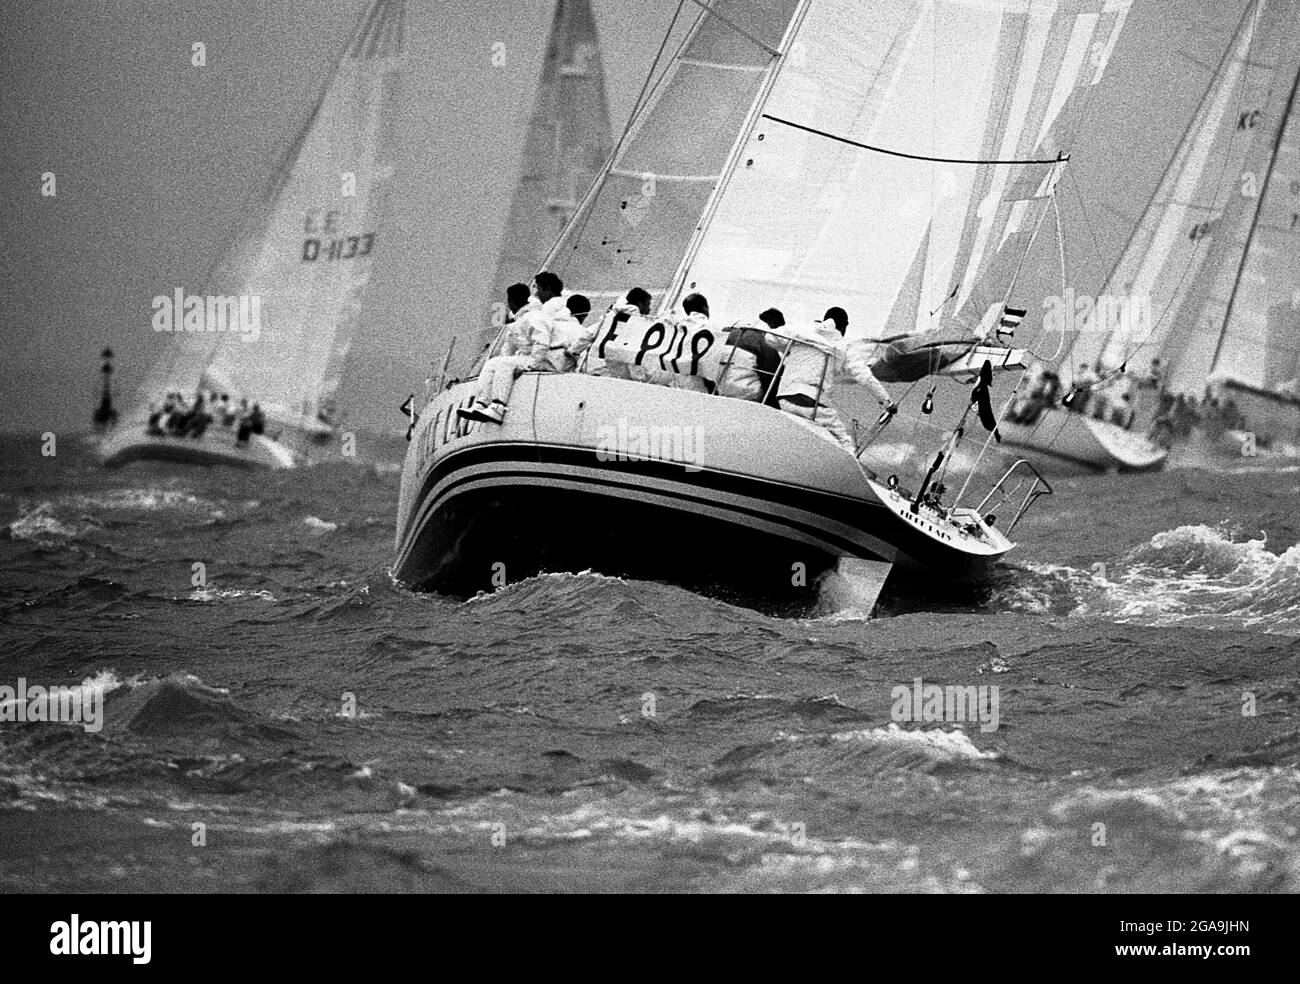 AJAXNETPHOTO. 1985. SOLENT, ENGLAND. - CHANNEL RACE START - FRENCH ADMIRAL'S CUP TEAM YACHT FIERE LADY IN ROUGH WEATHER AT THE START. PHOTO:JONATHAN EASTLAND/AJAX REF:CHR85 10A 17 Stock Photo